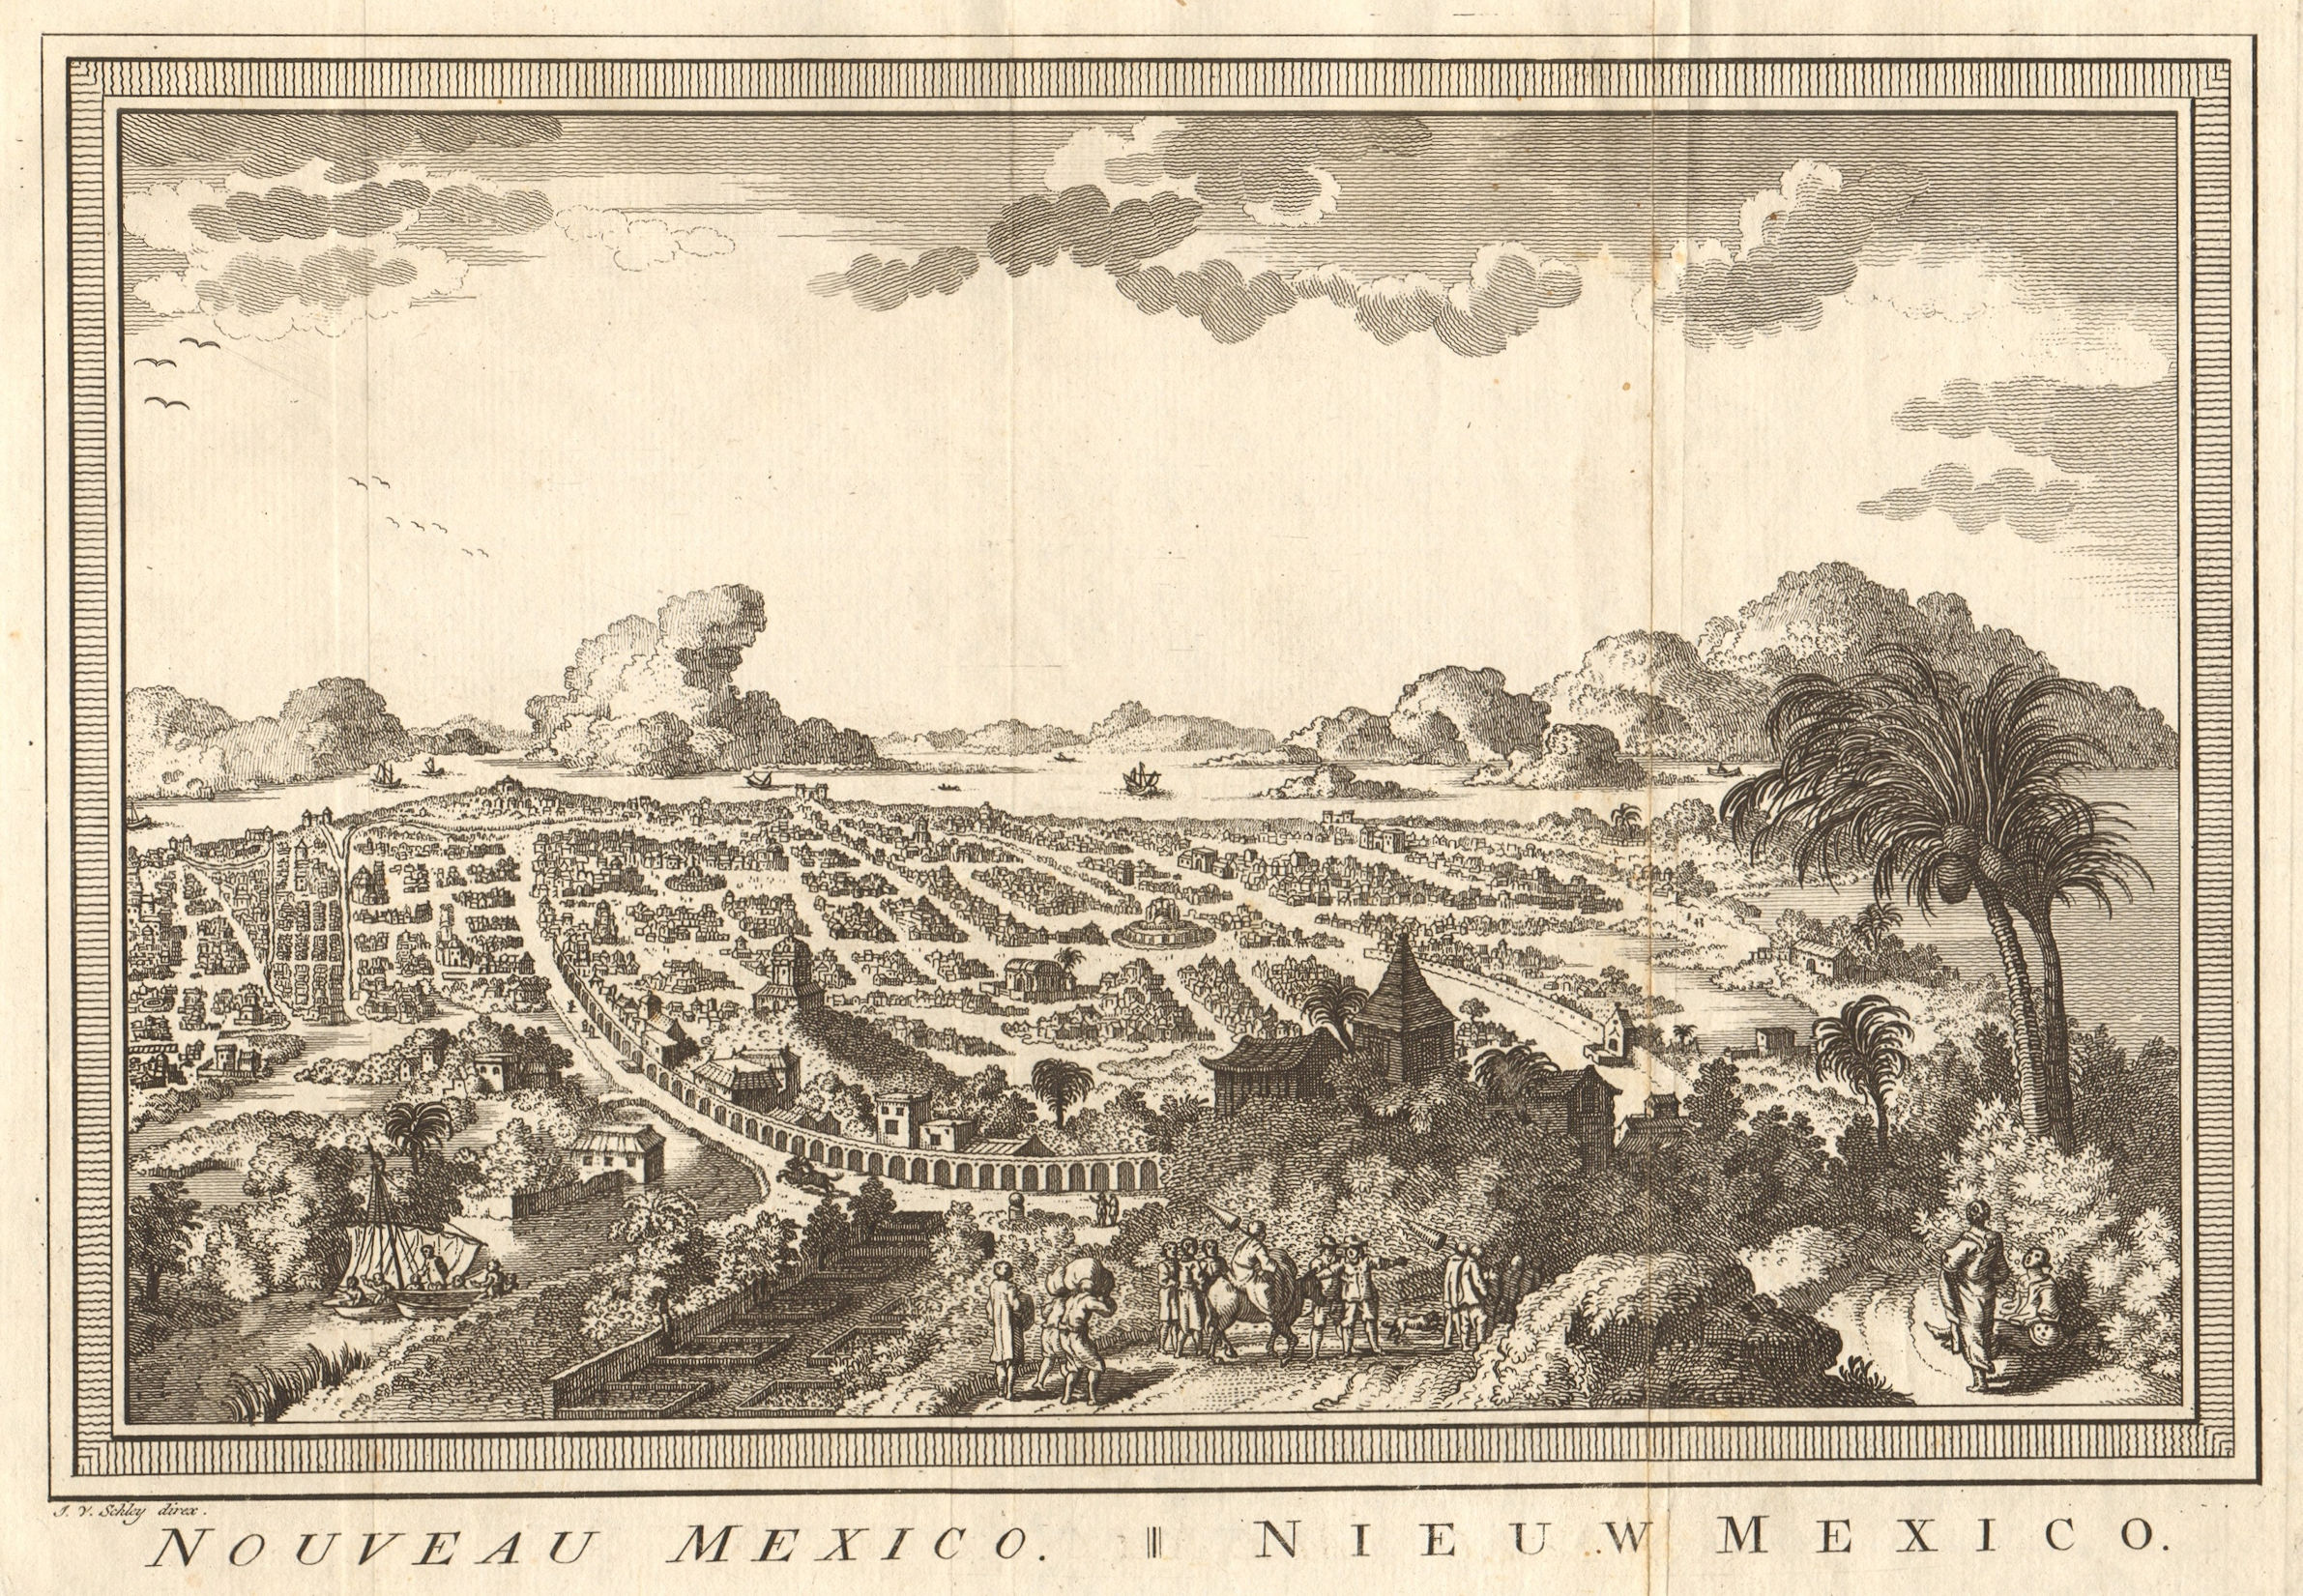 Associate Product 'Nouveau Mexico'. Mexico City as it was in the 18th century. SCHLEY 1758 print